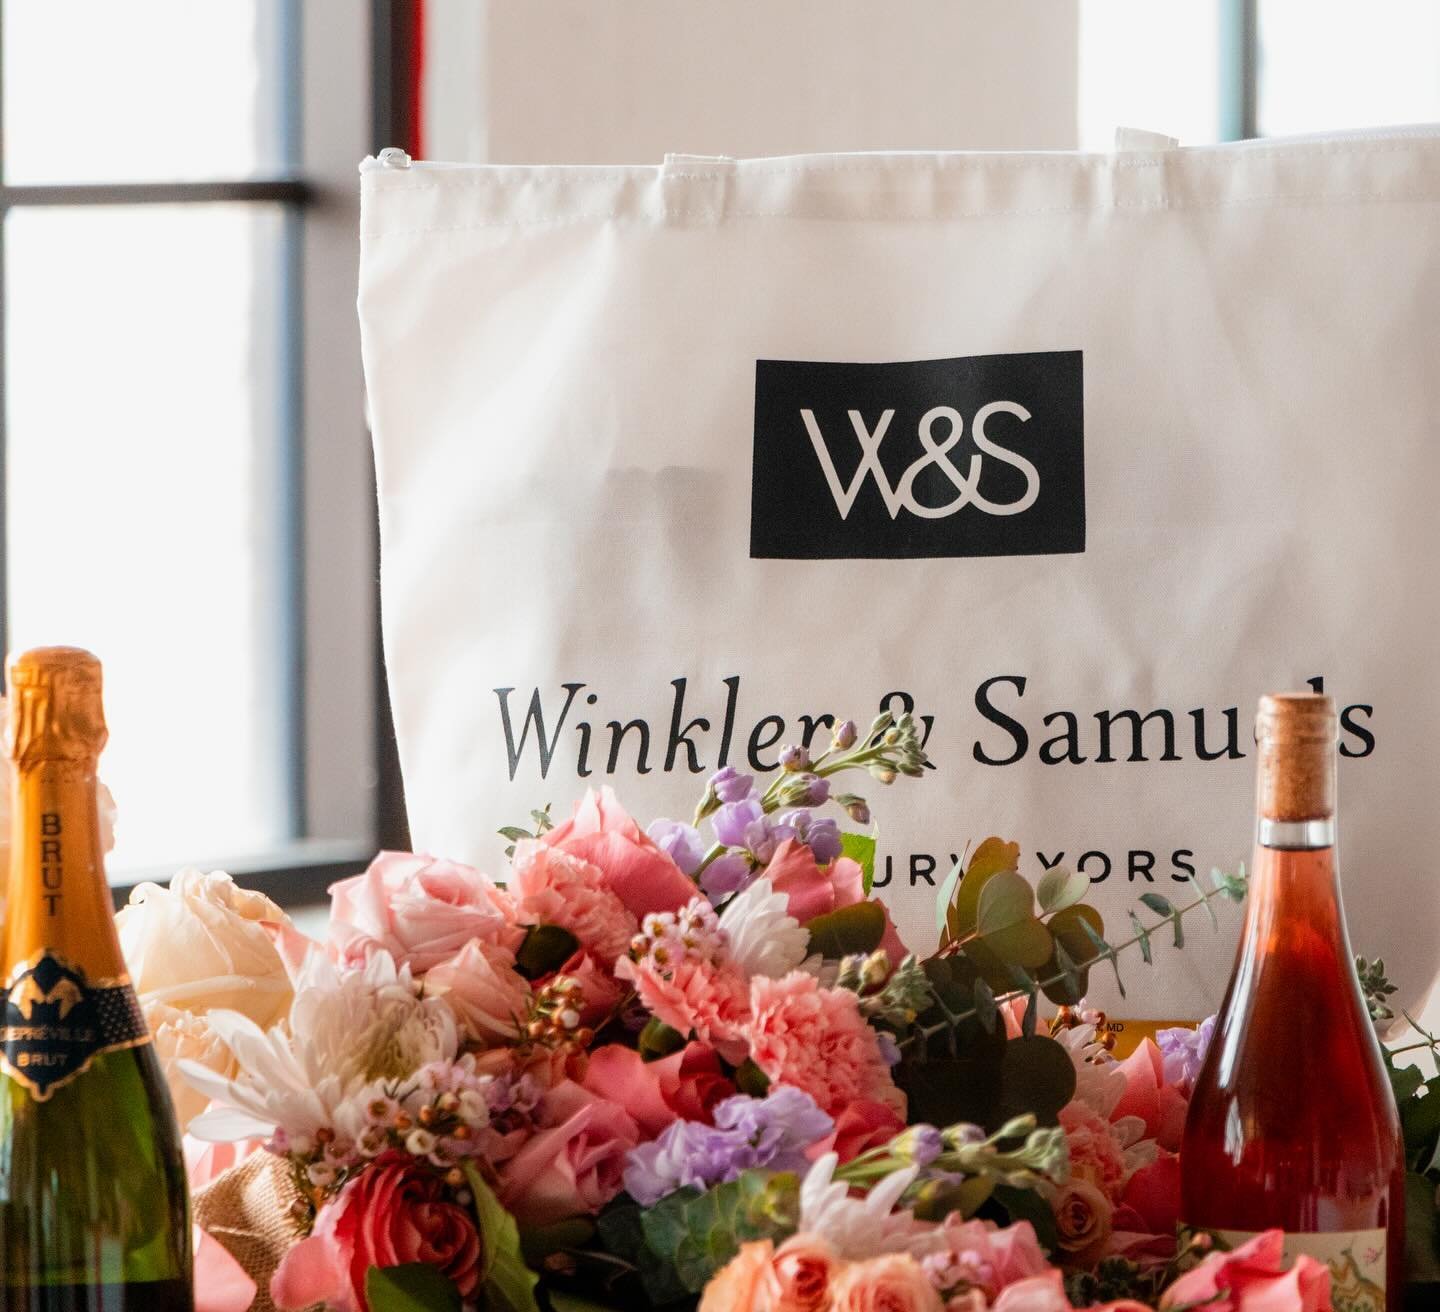 We&rsquo;re partnering with @winklerandsamuelswine for a special flower arranging &amp; wine tasting class on Tuesday May 28th!! You won&rsquo;t want to miss it. 

Head to the Link in Bio to register for the class! Can&rsquo;t wait to see you there! 